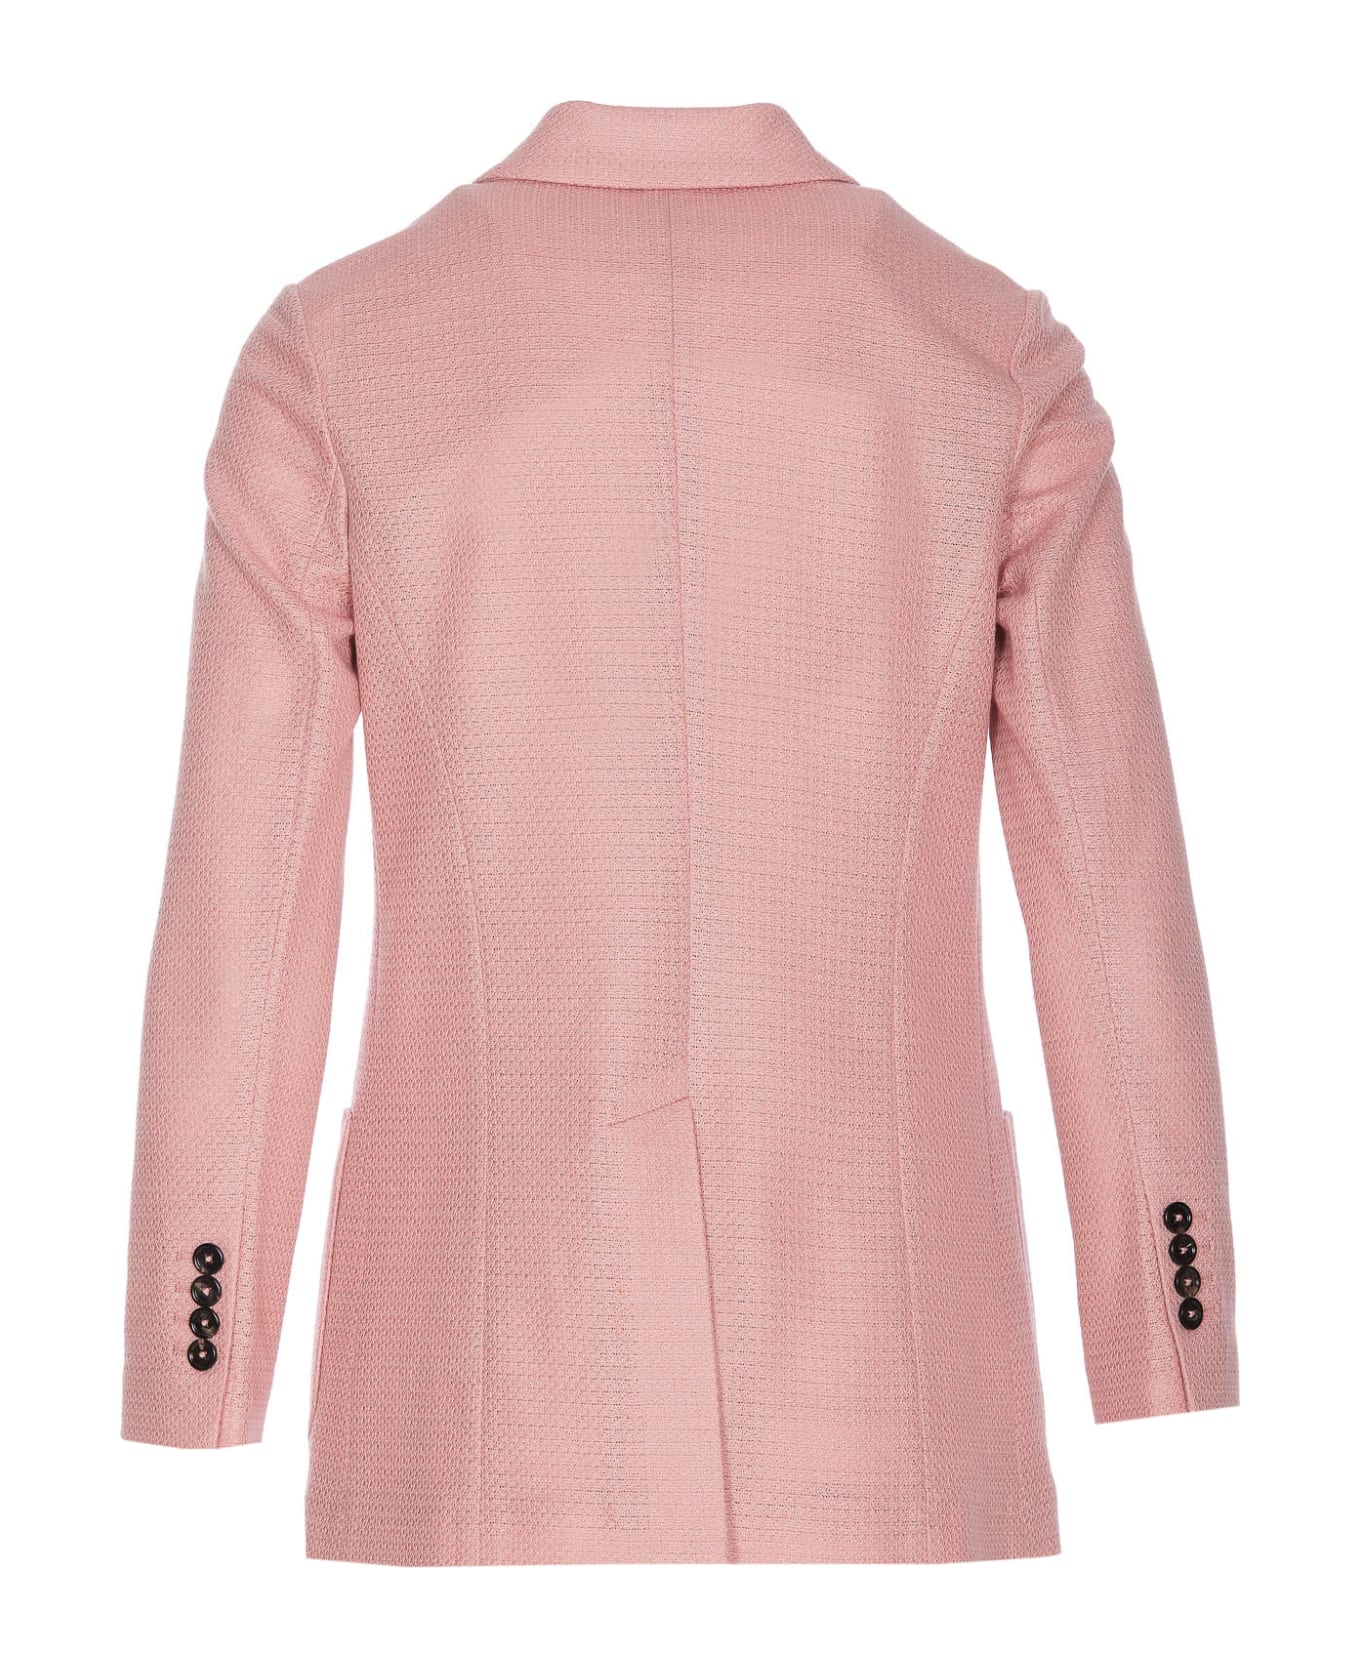 Circolo 1901 Double Breasted Button Jacket - Pink